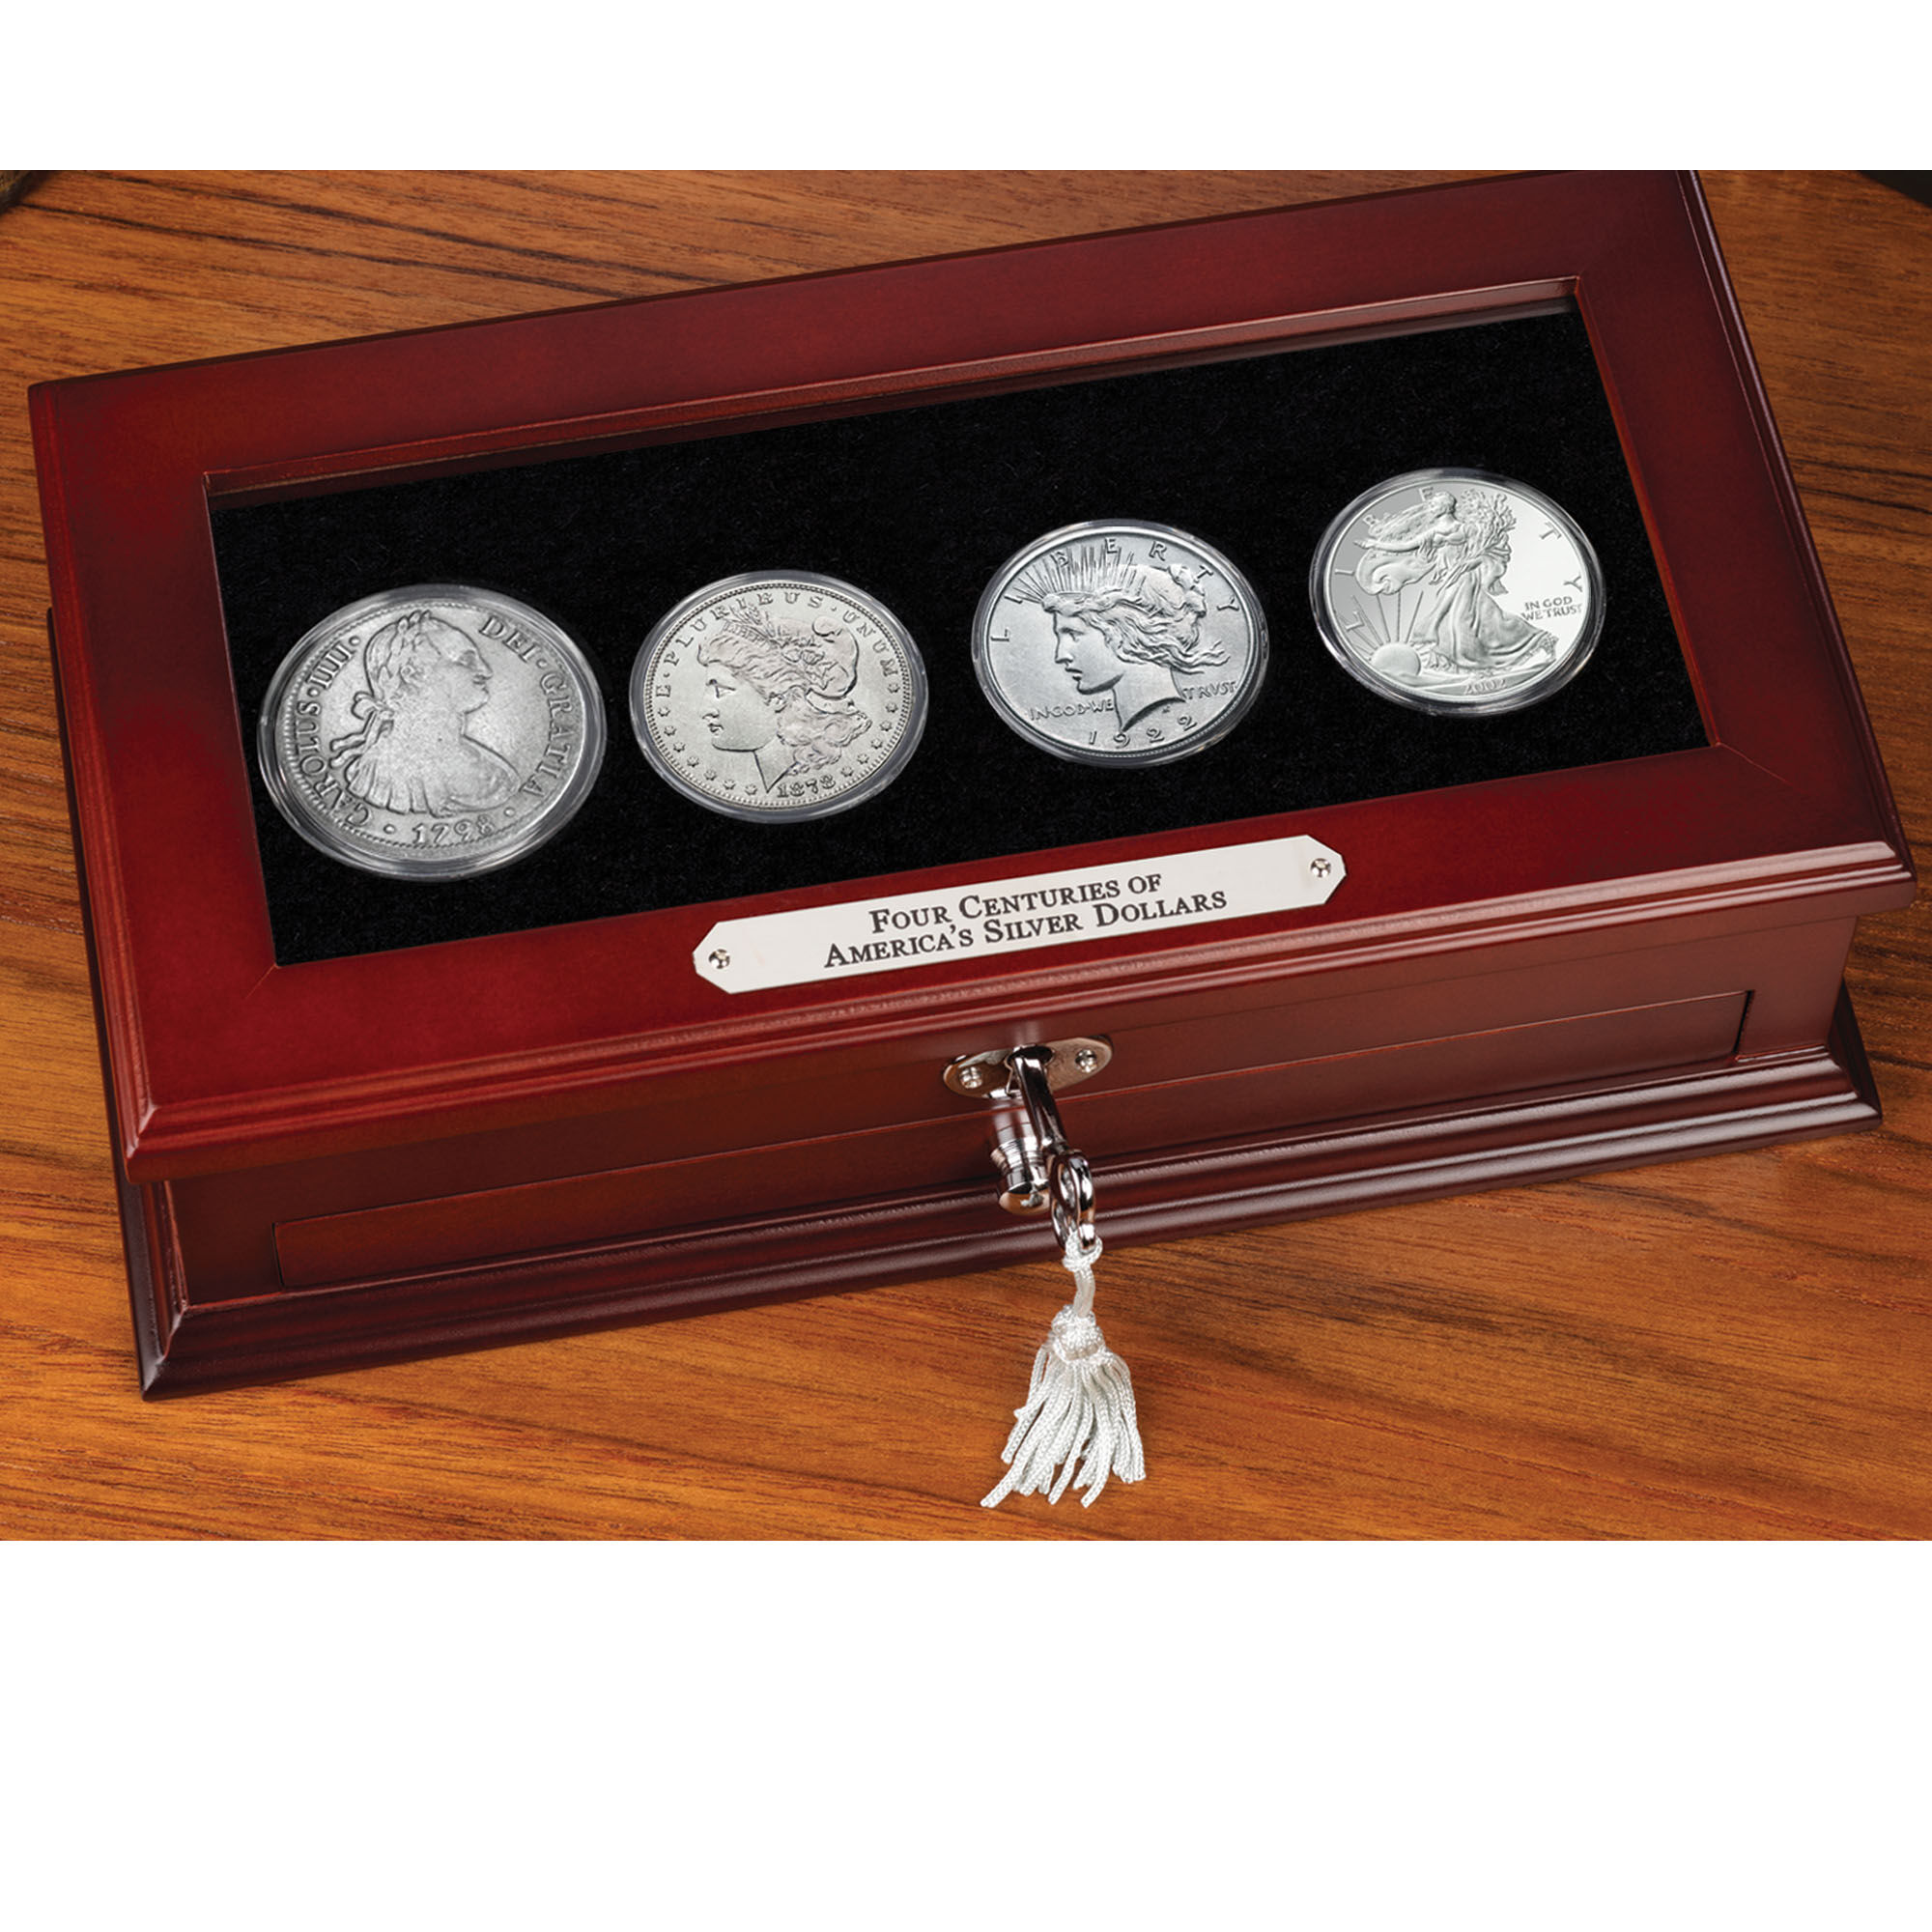 four centuries of americas silver dollars SS4 c Chest